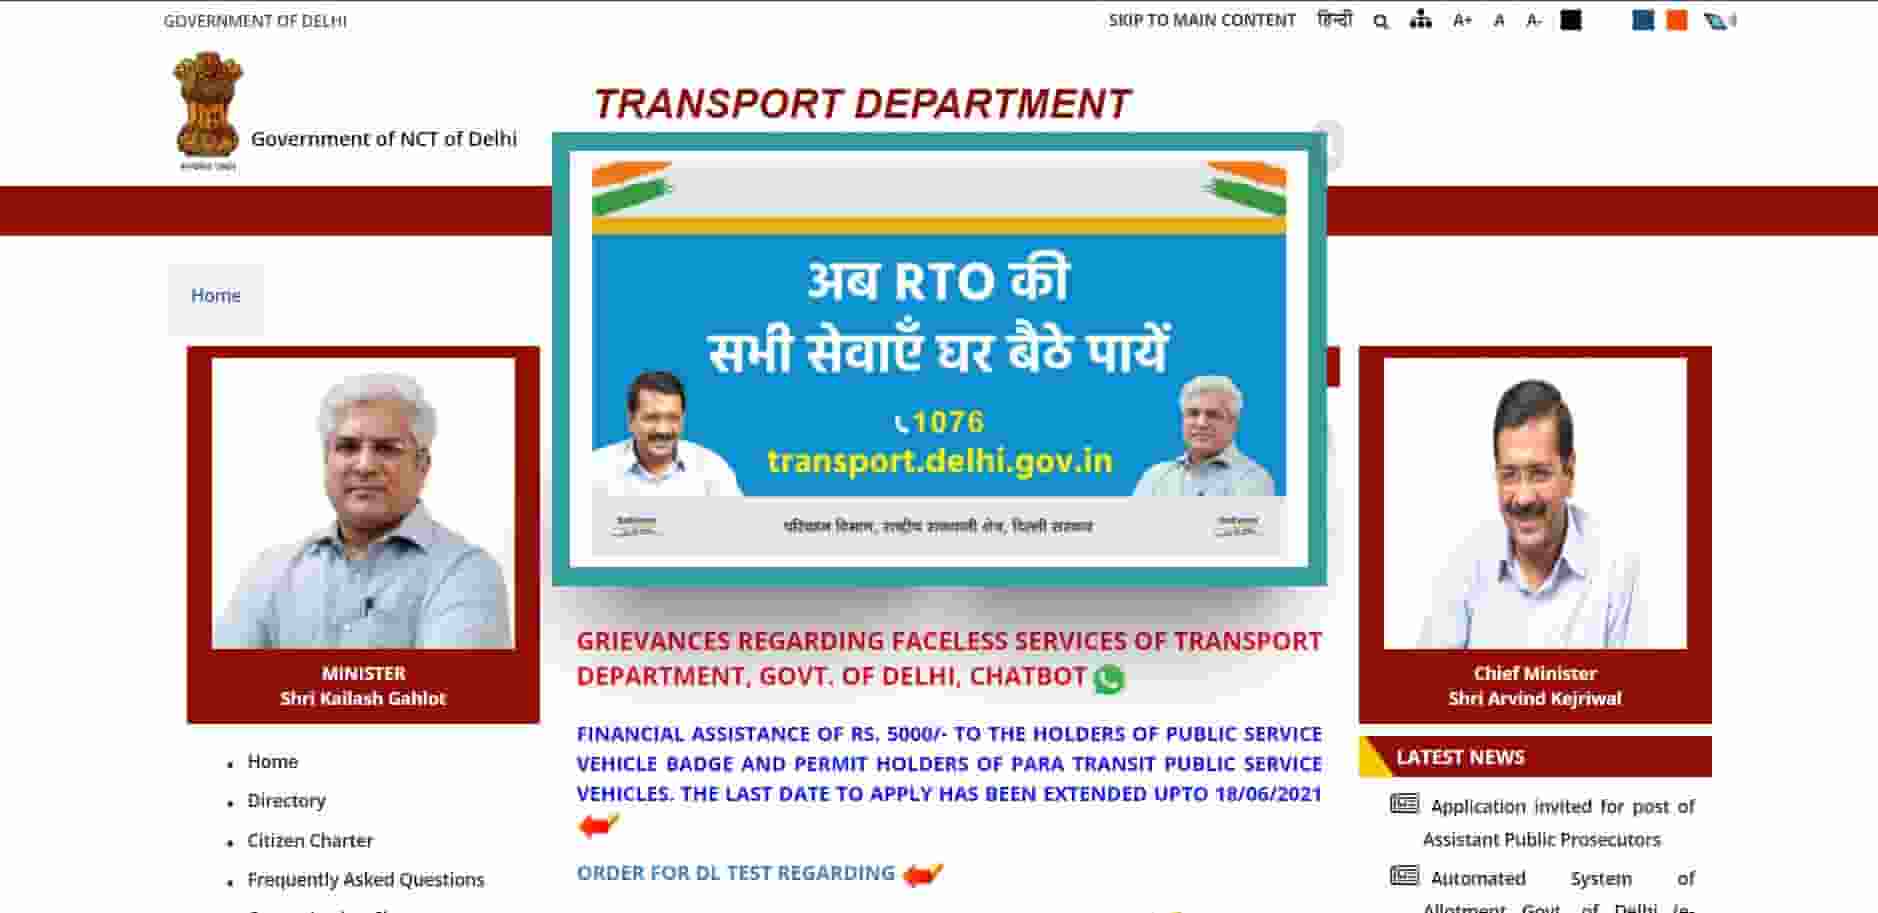 how to avail faceless rto services online, faceless services, driving license online, delhi rto services, 33 faceless rto services, avail faceless rto services, learner driving license, new delhi rto services